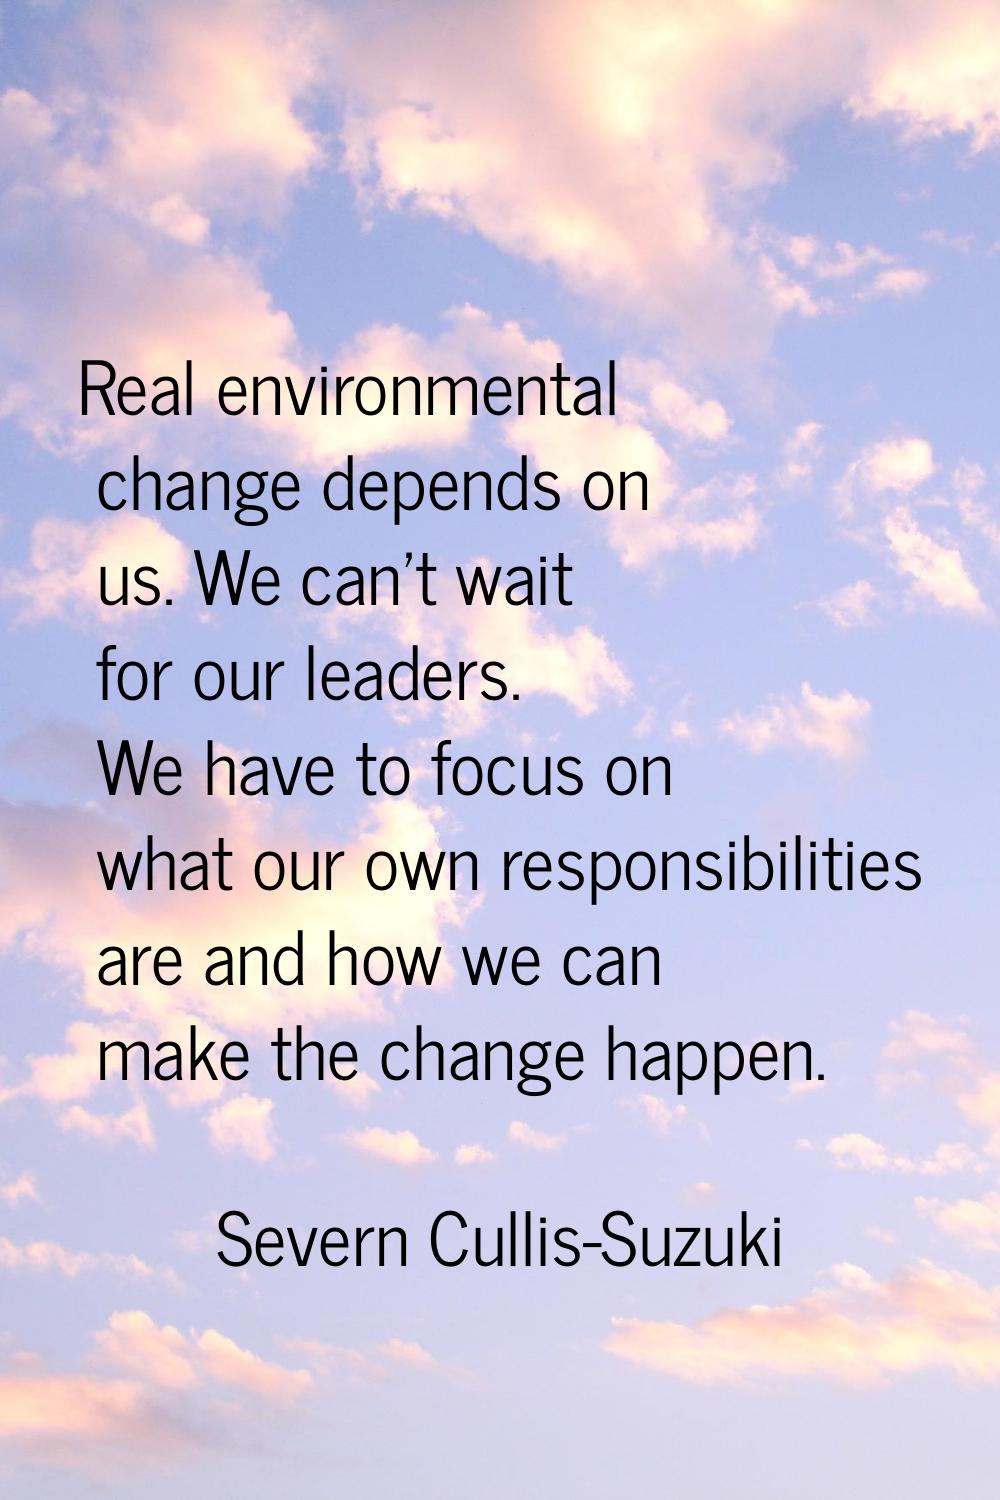 Real environmental change depends on us. We can't wait for our leaders. We have to focus on what ou